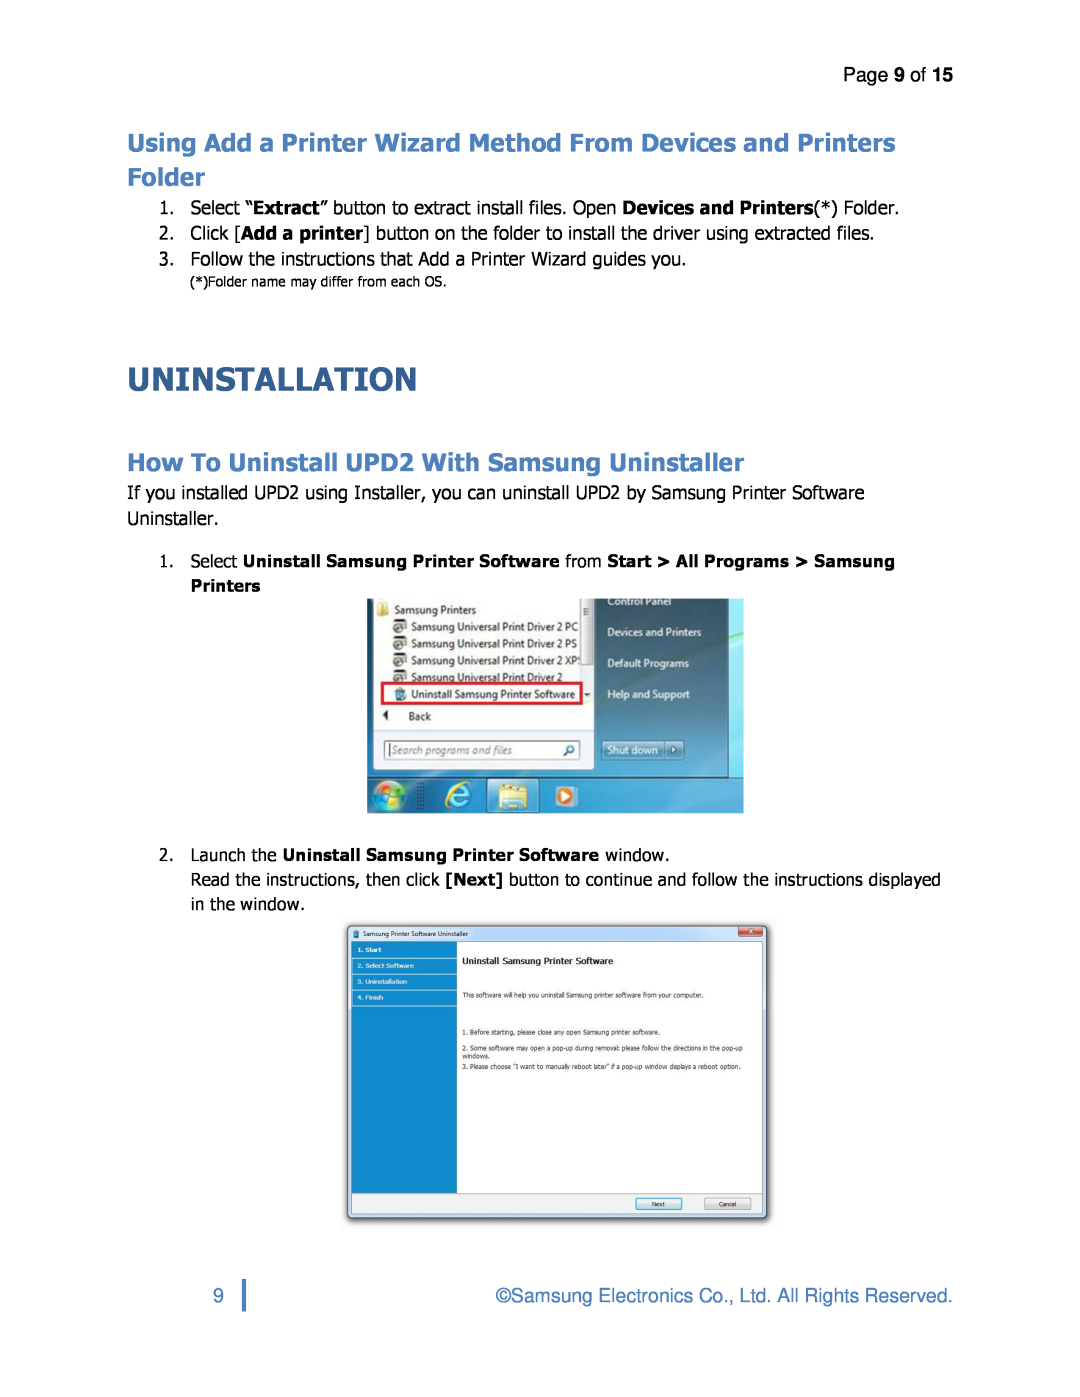 Samsung ML2165W, SLM3870FW Uninstallation, Using Add a Printer Wizard Method From Devices and Printers Folder, Page 9 of 